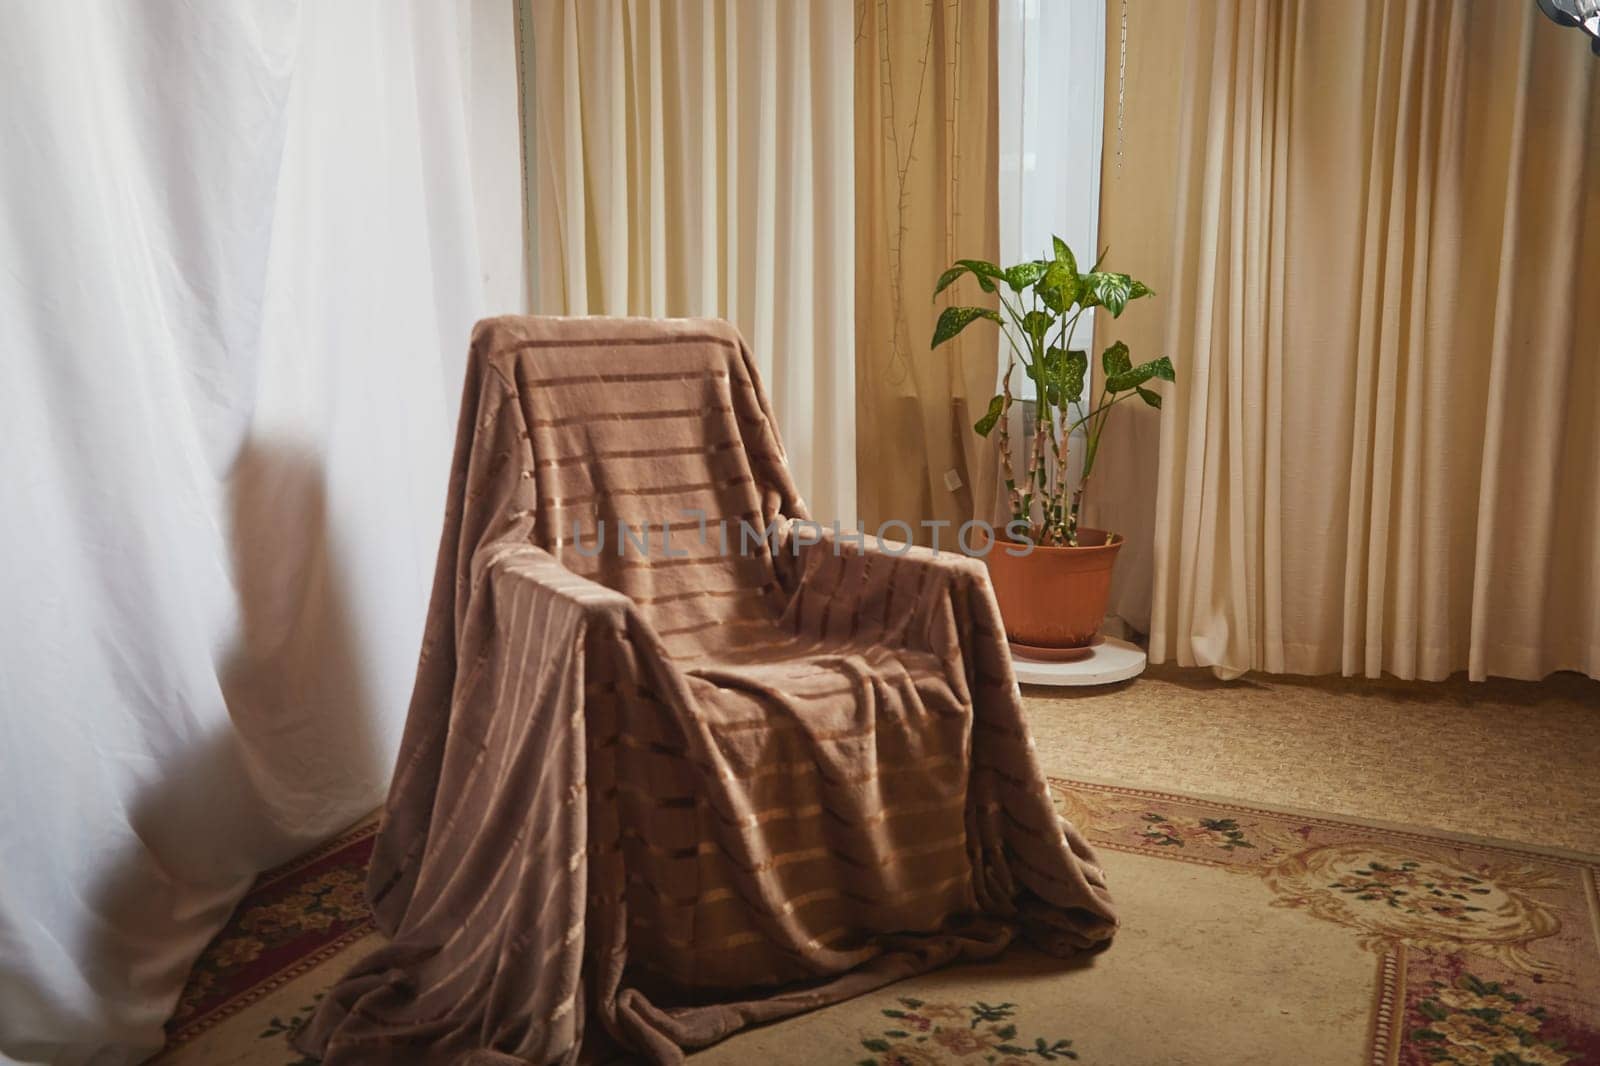 Living room with armchair, window, fabric curtains, home flower dieffenbachia and gentle light and lighting. Loft style in interior. Background and location for photo shoot